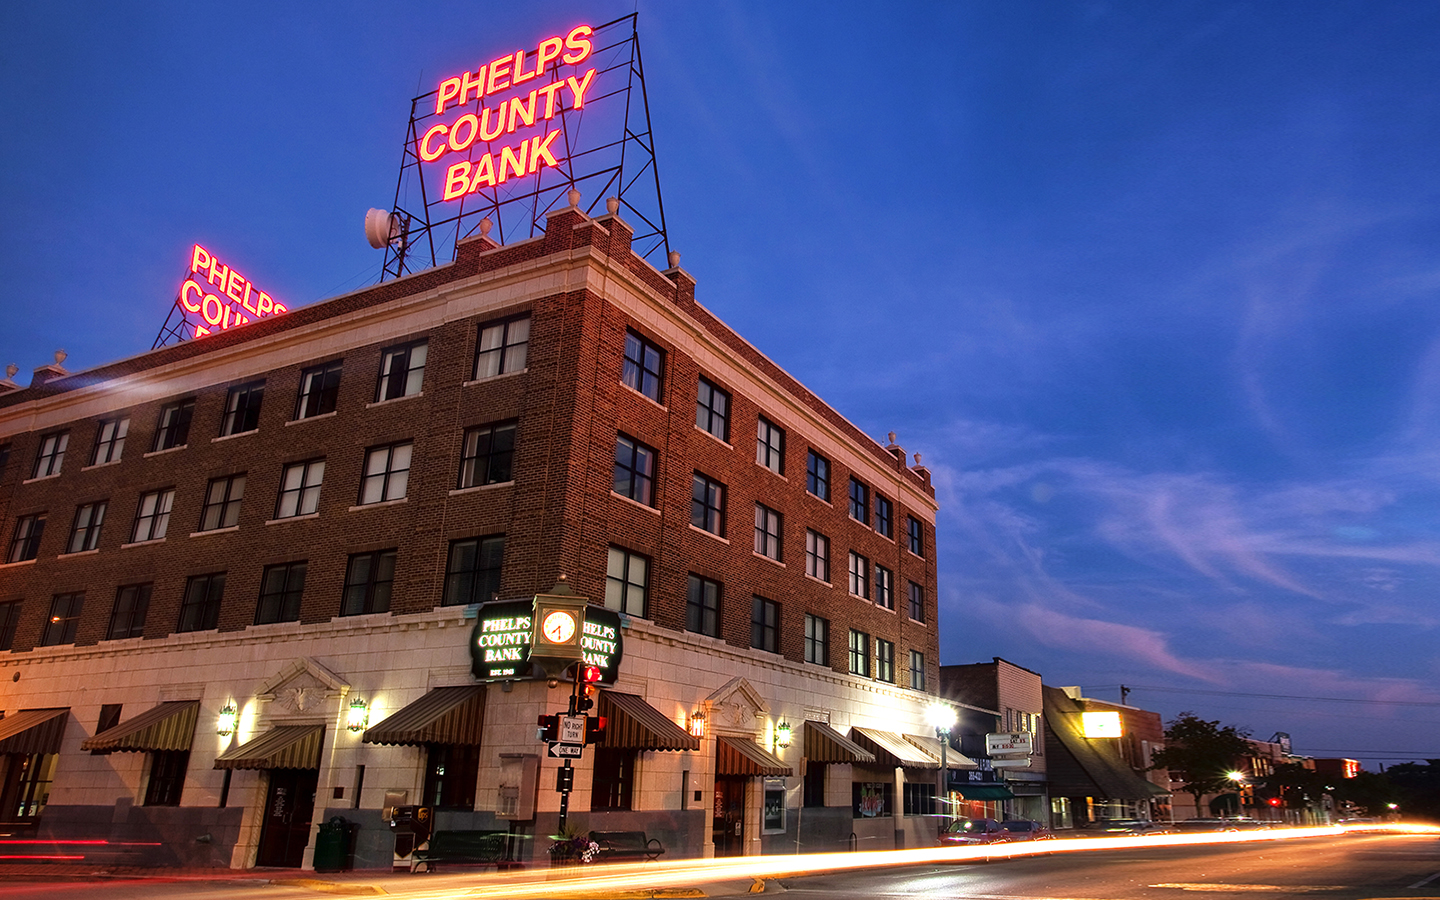 Picture of the Rolla downtown bank at night.